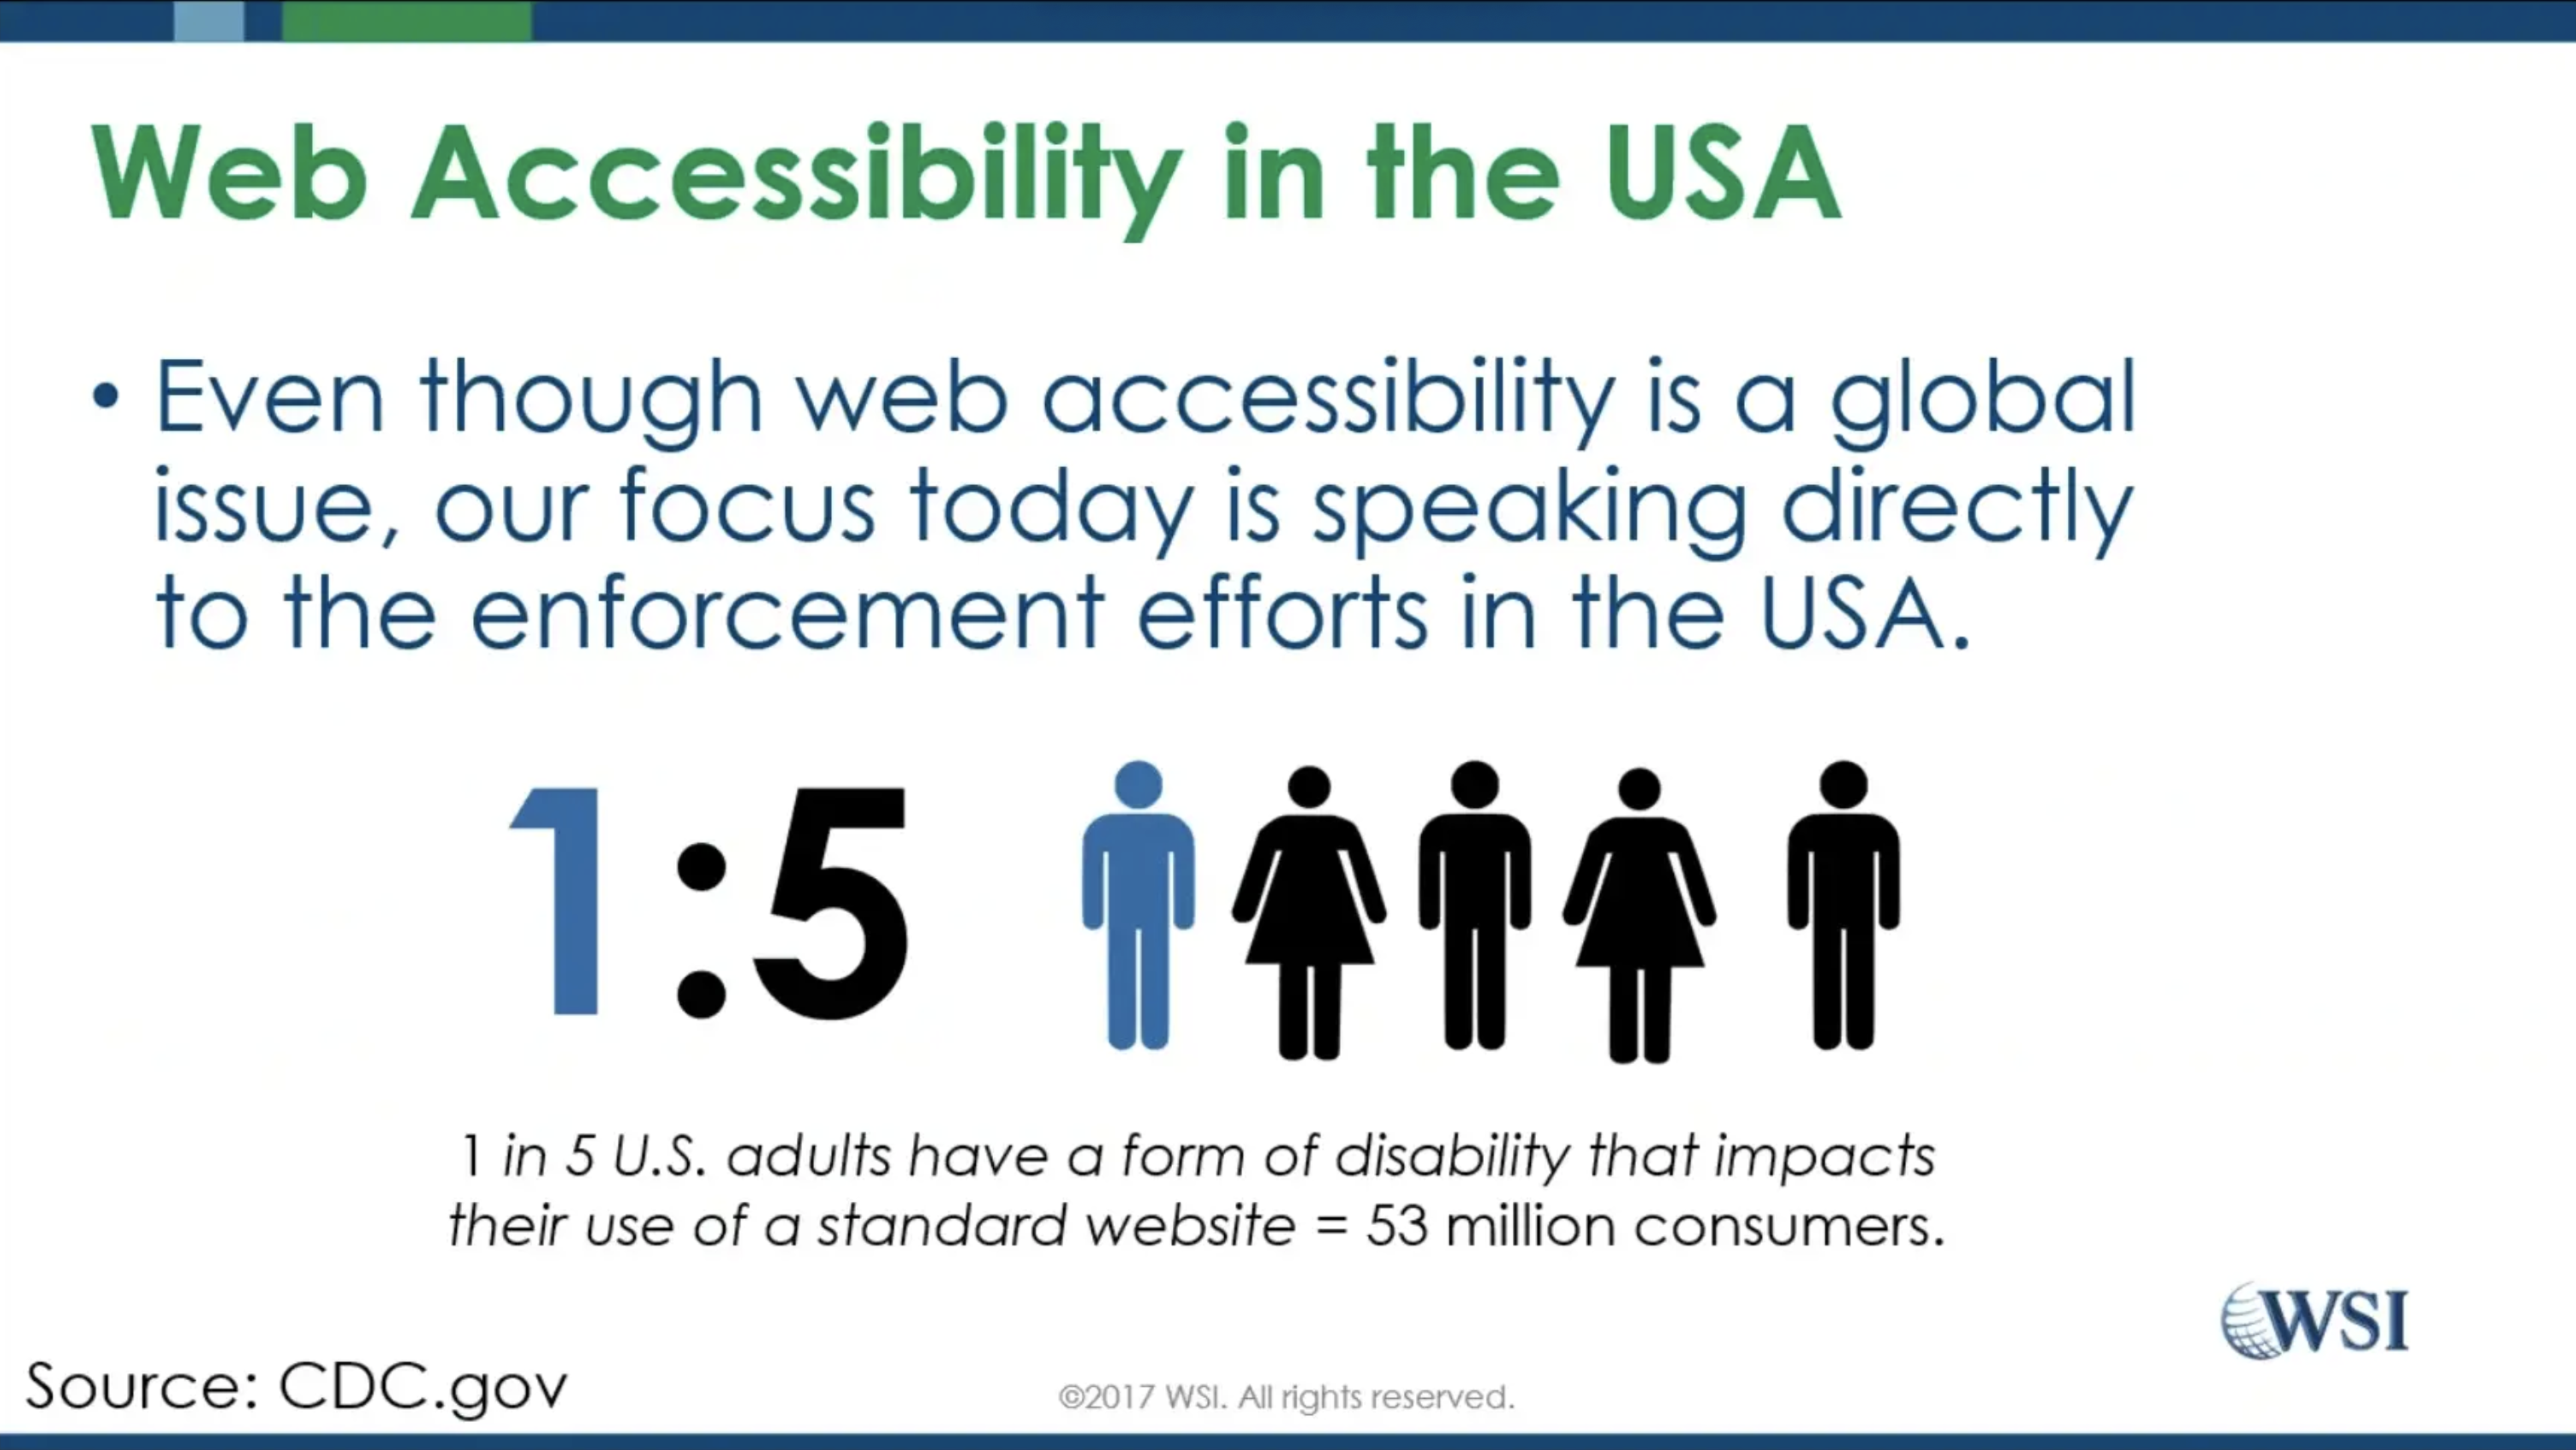 A slide that shows how web accessibility affects 1 in 5 adults in the United States. Image credit: WSI